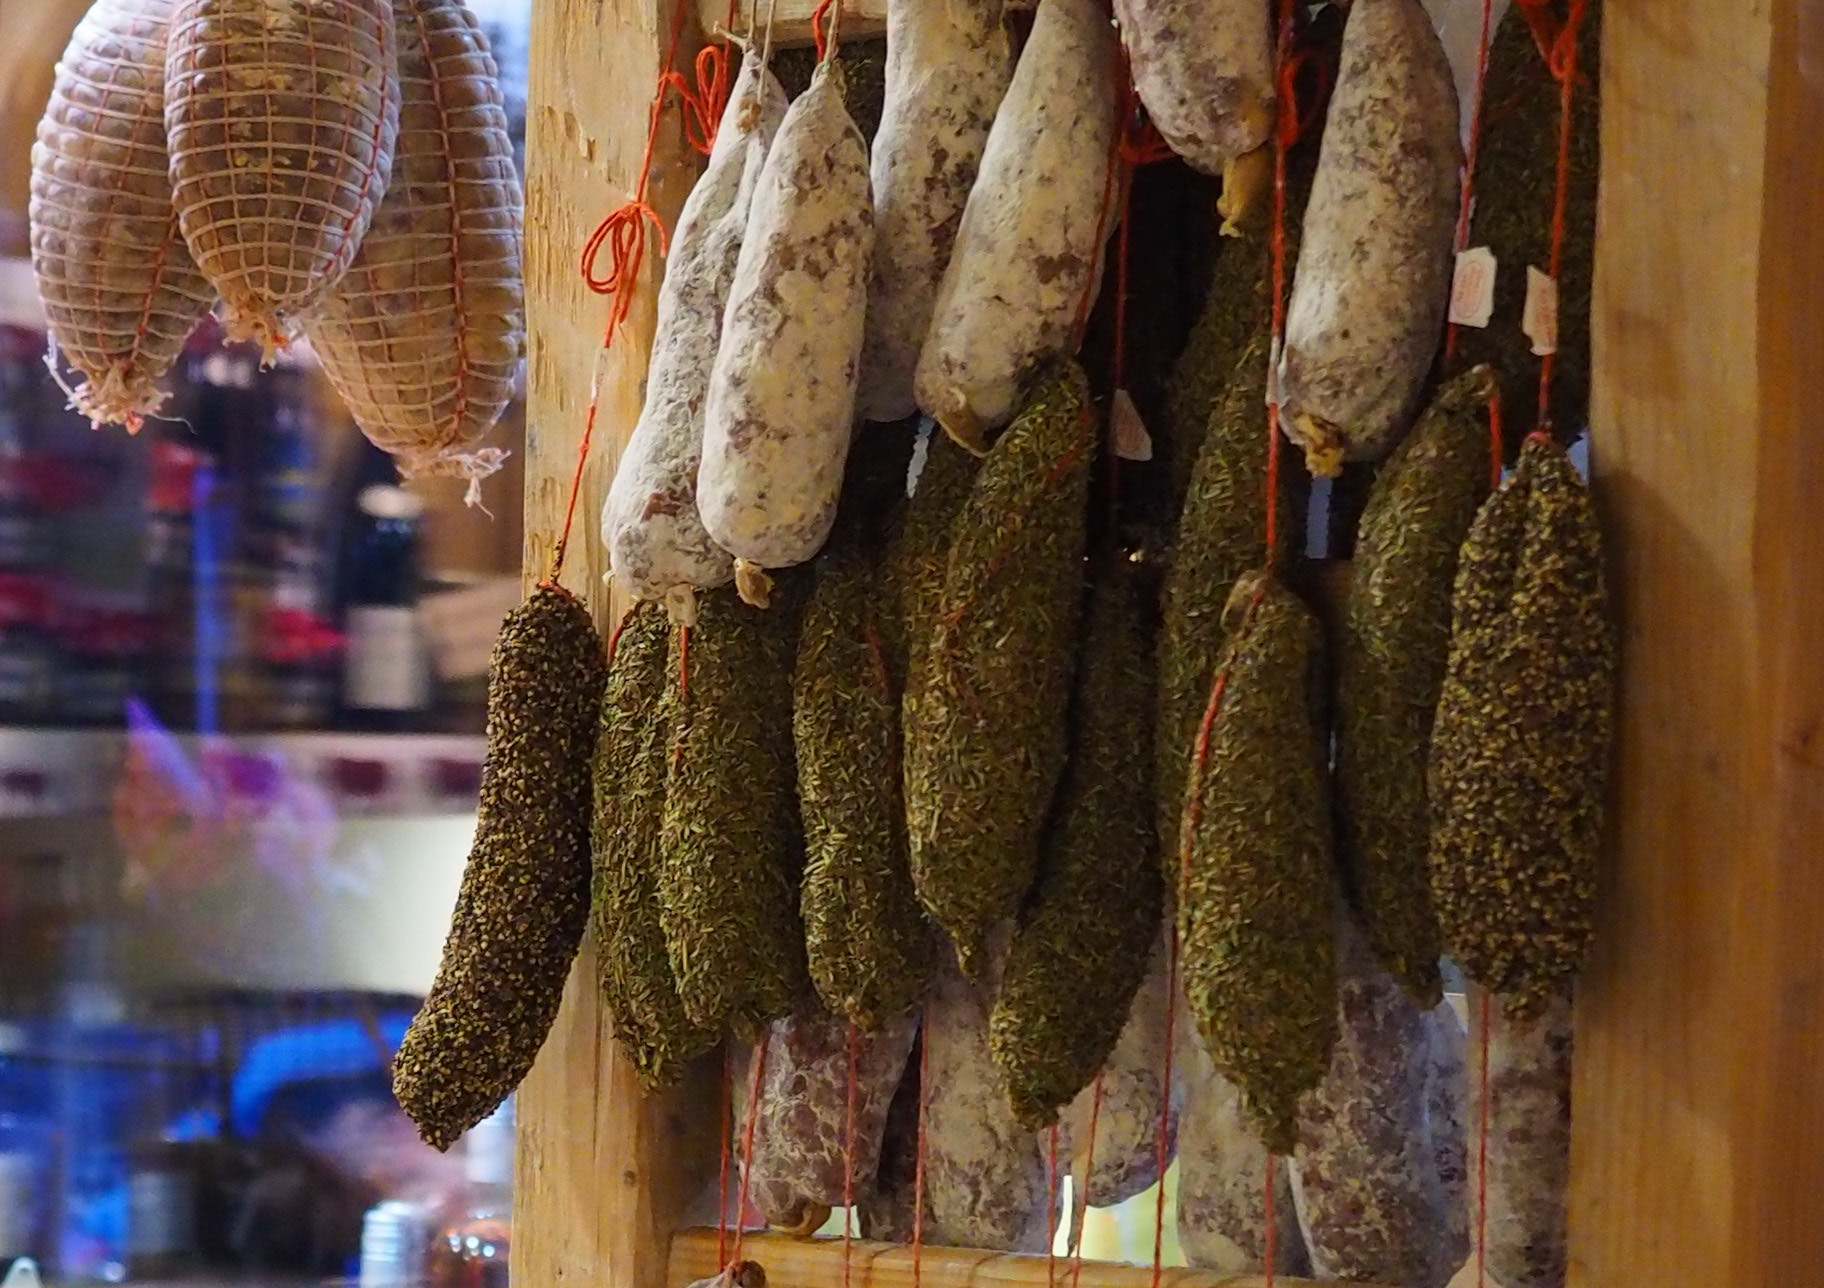 French saucisson specialities